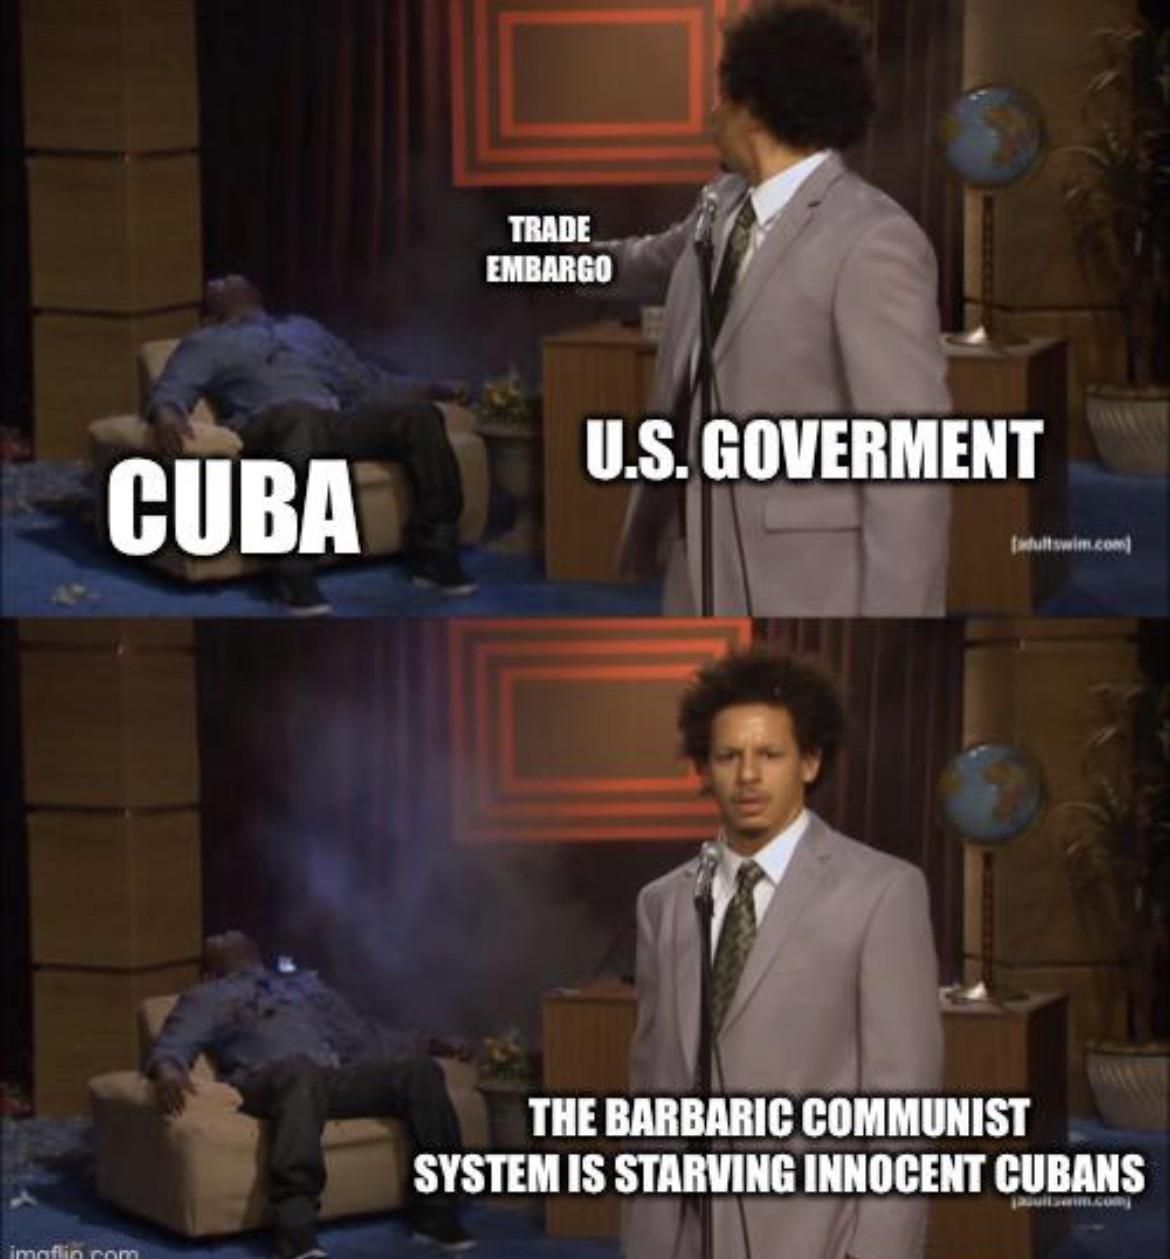 “Why don’t those sanctions work, they couldn’t possible support the government”